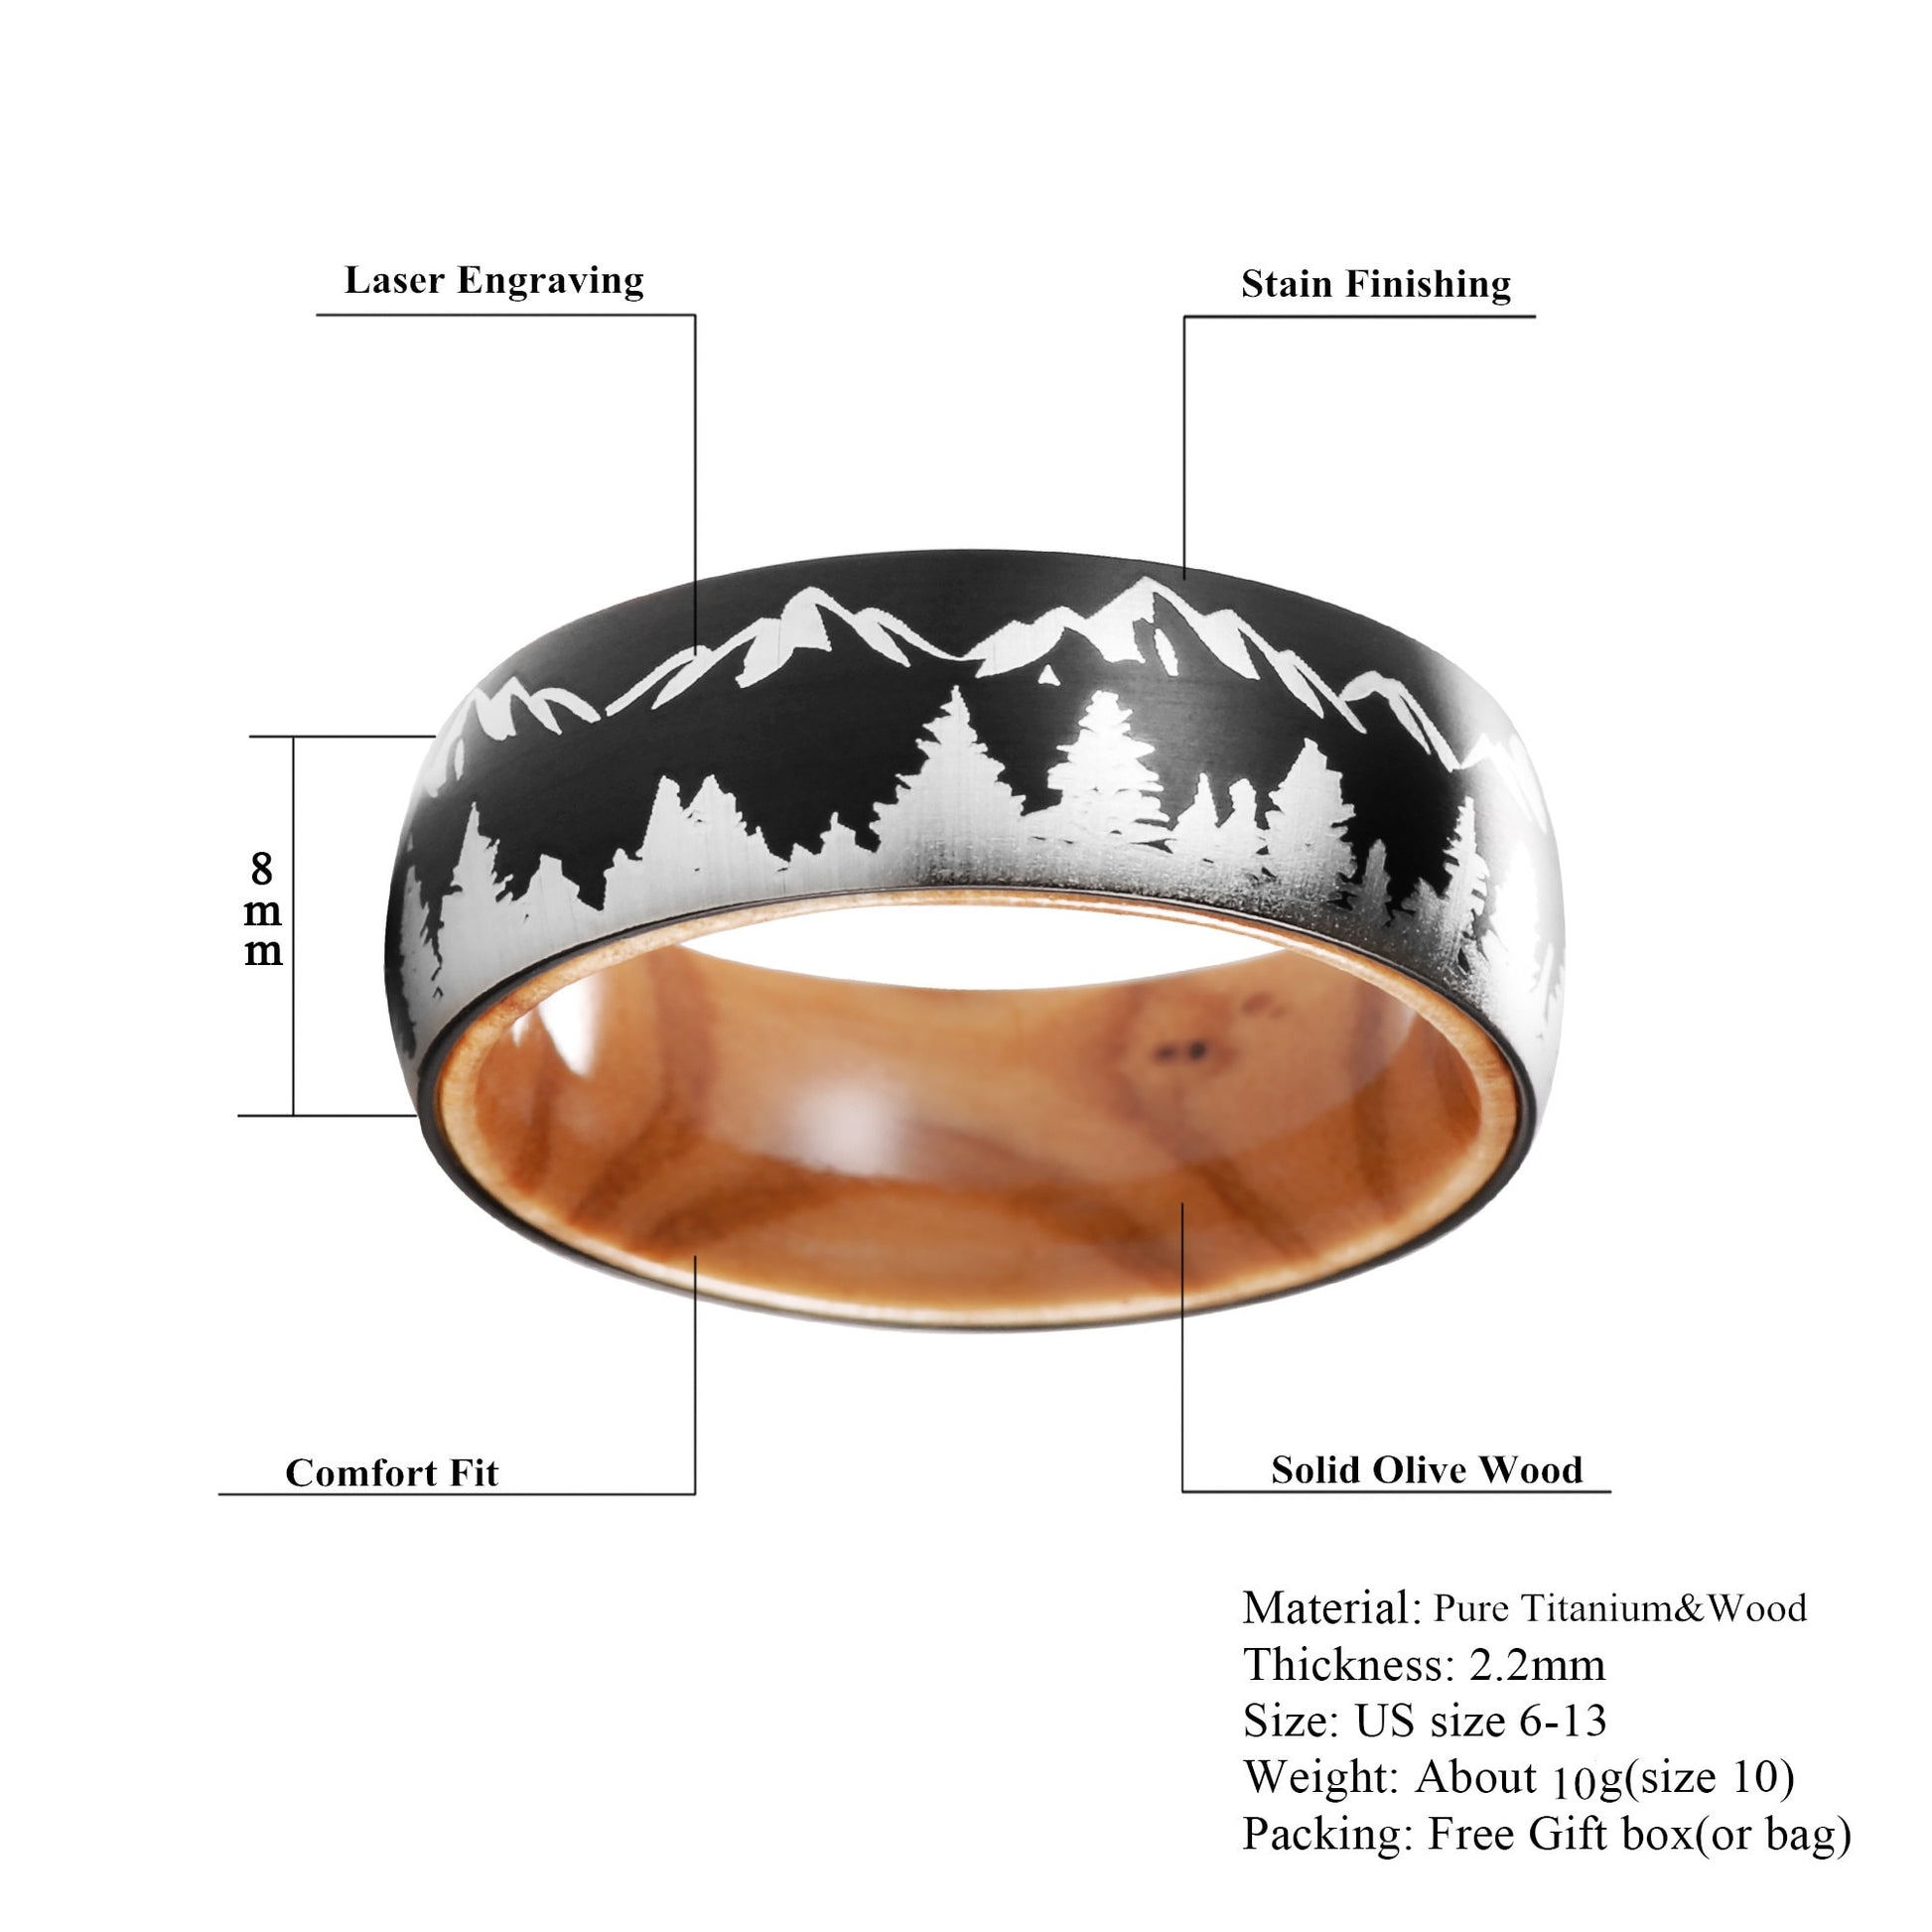 Wooden ring - SIZE 8 US